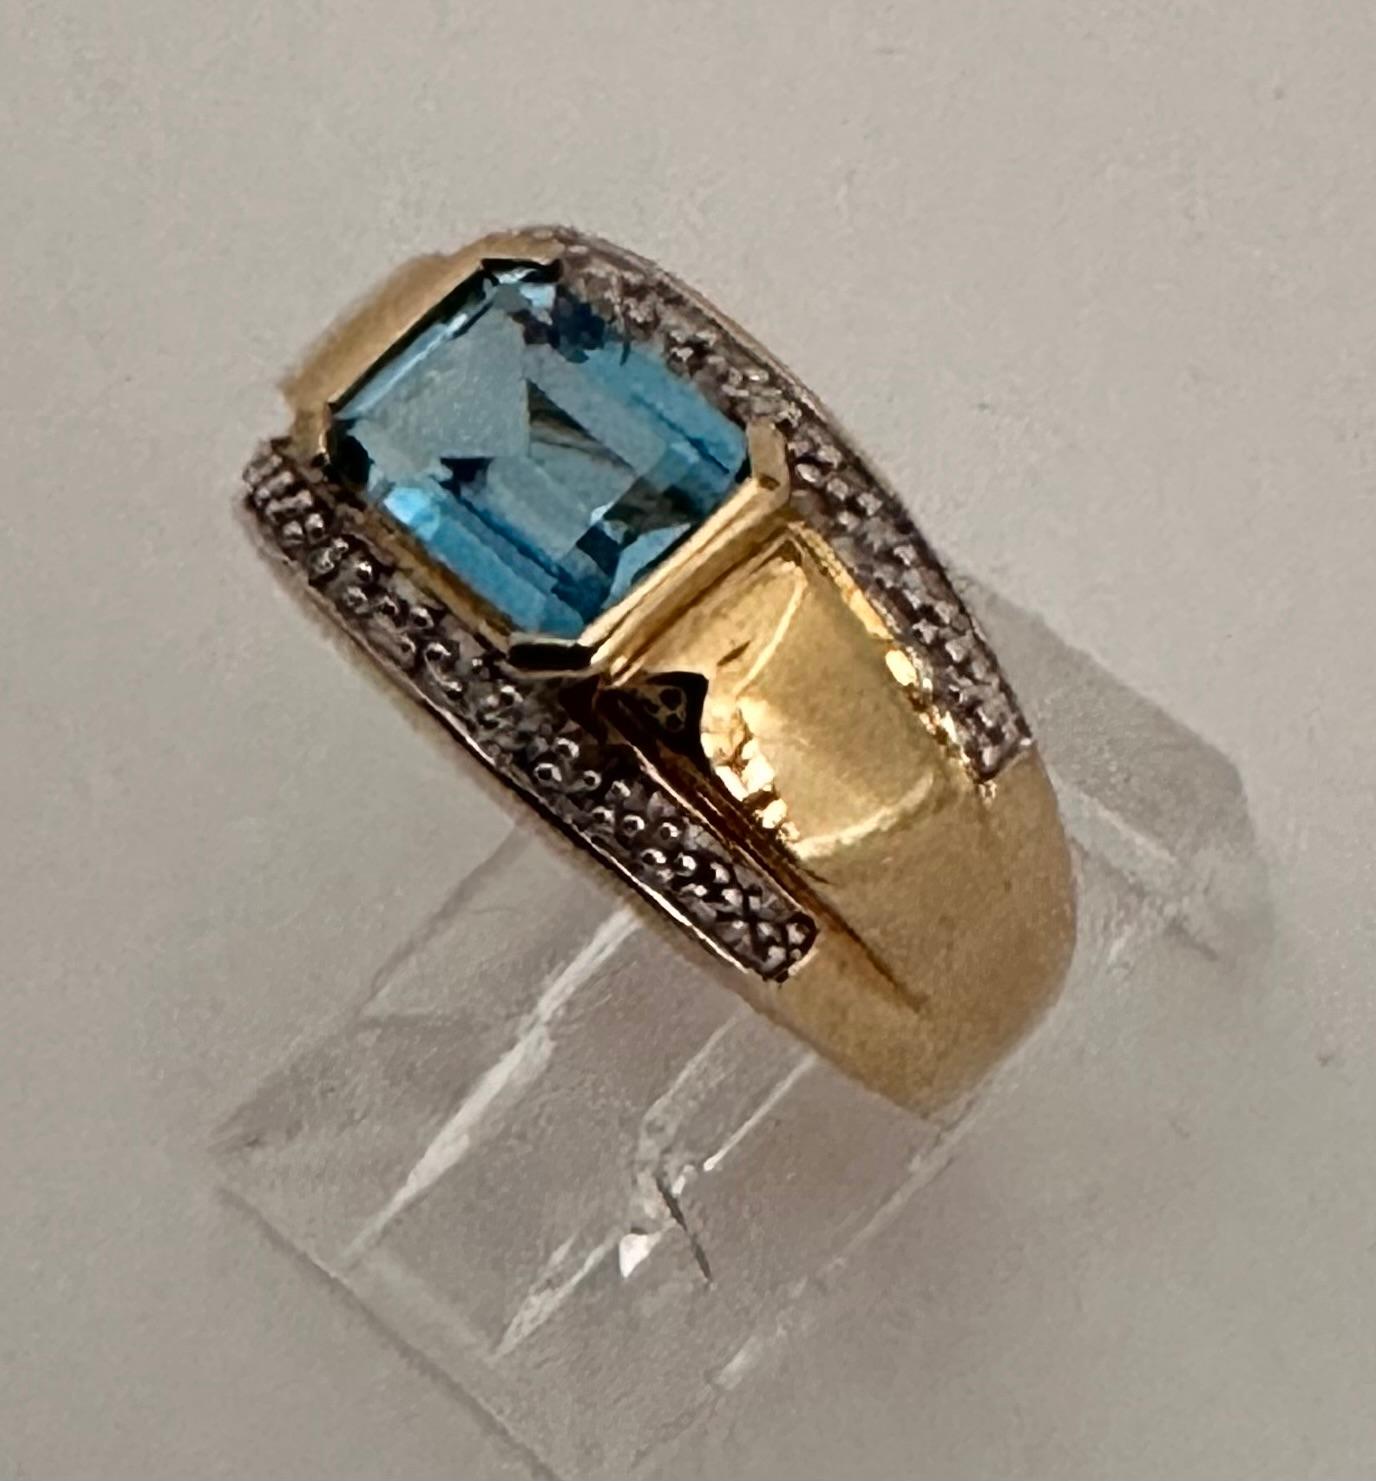 10k Yellow Gold 6mm x 8mm Emerald Cut Blue Topaz Diamond Ring Size 7 For Sale 7